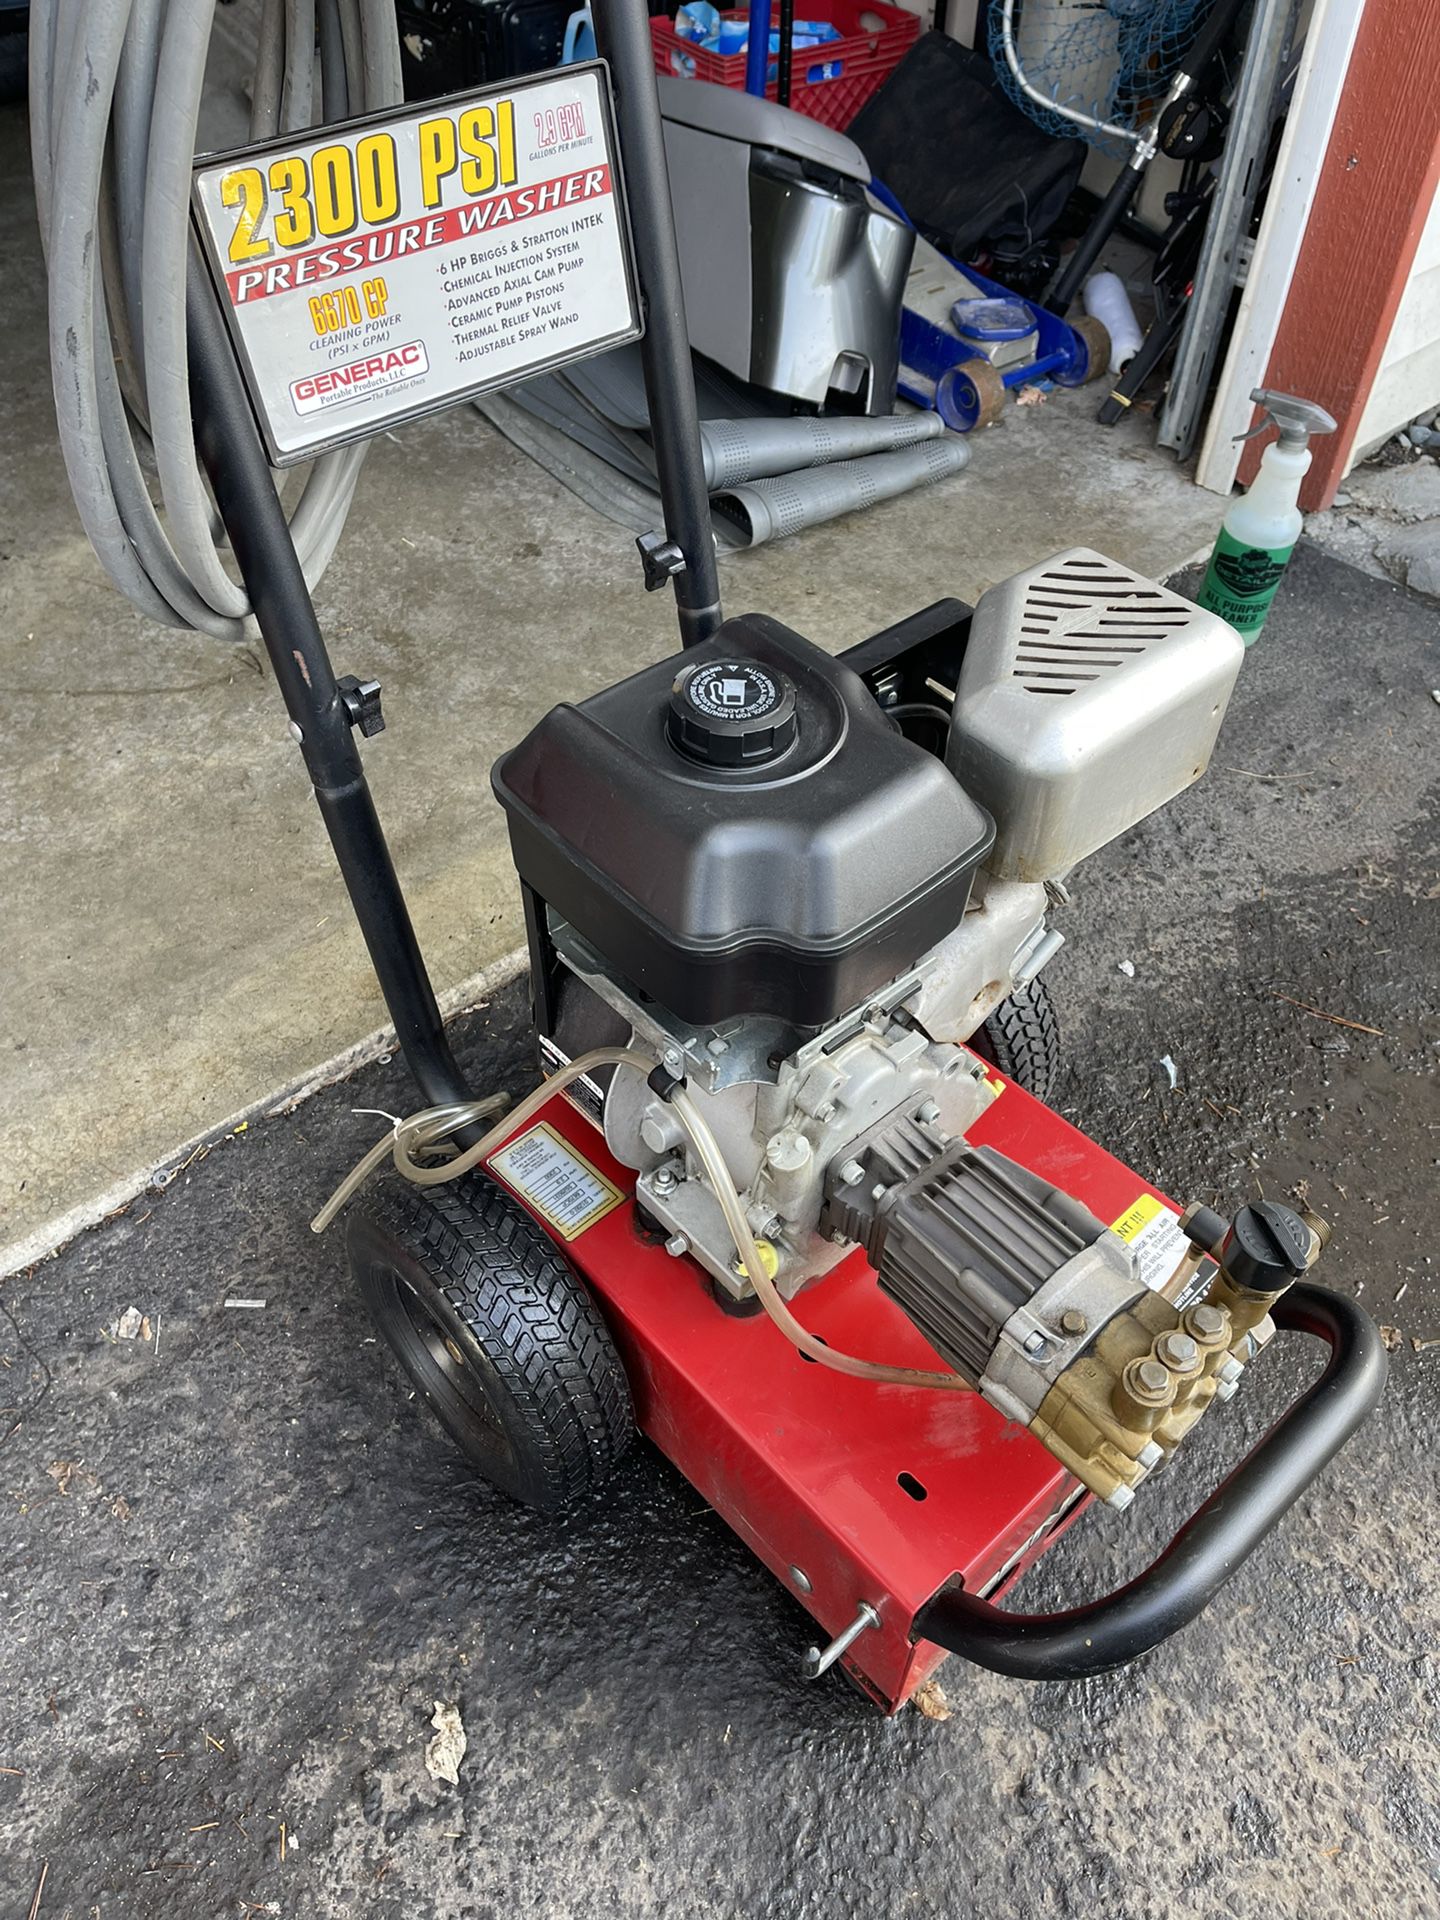 Generac Pressure Washer 2300psi for Sale in Kent, WA - OfferUp